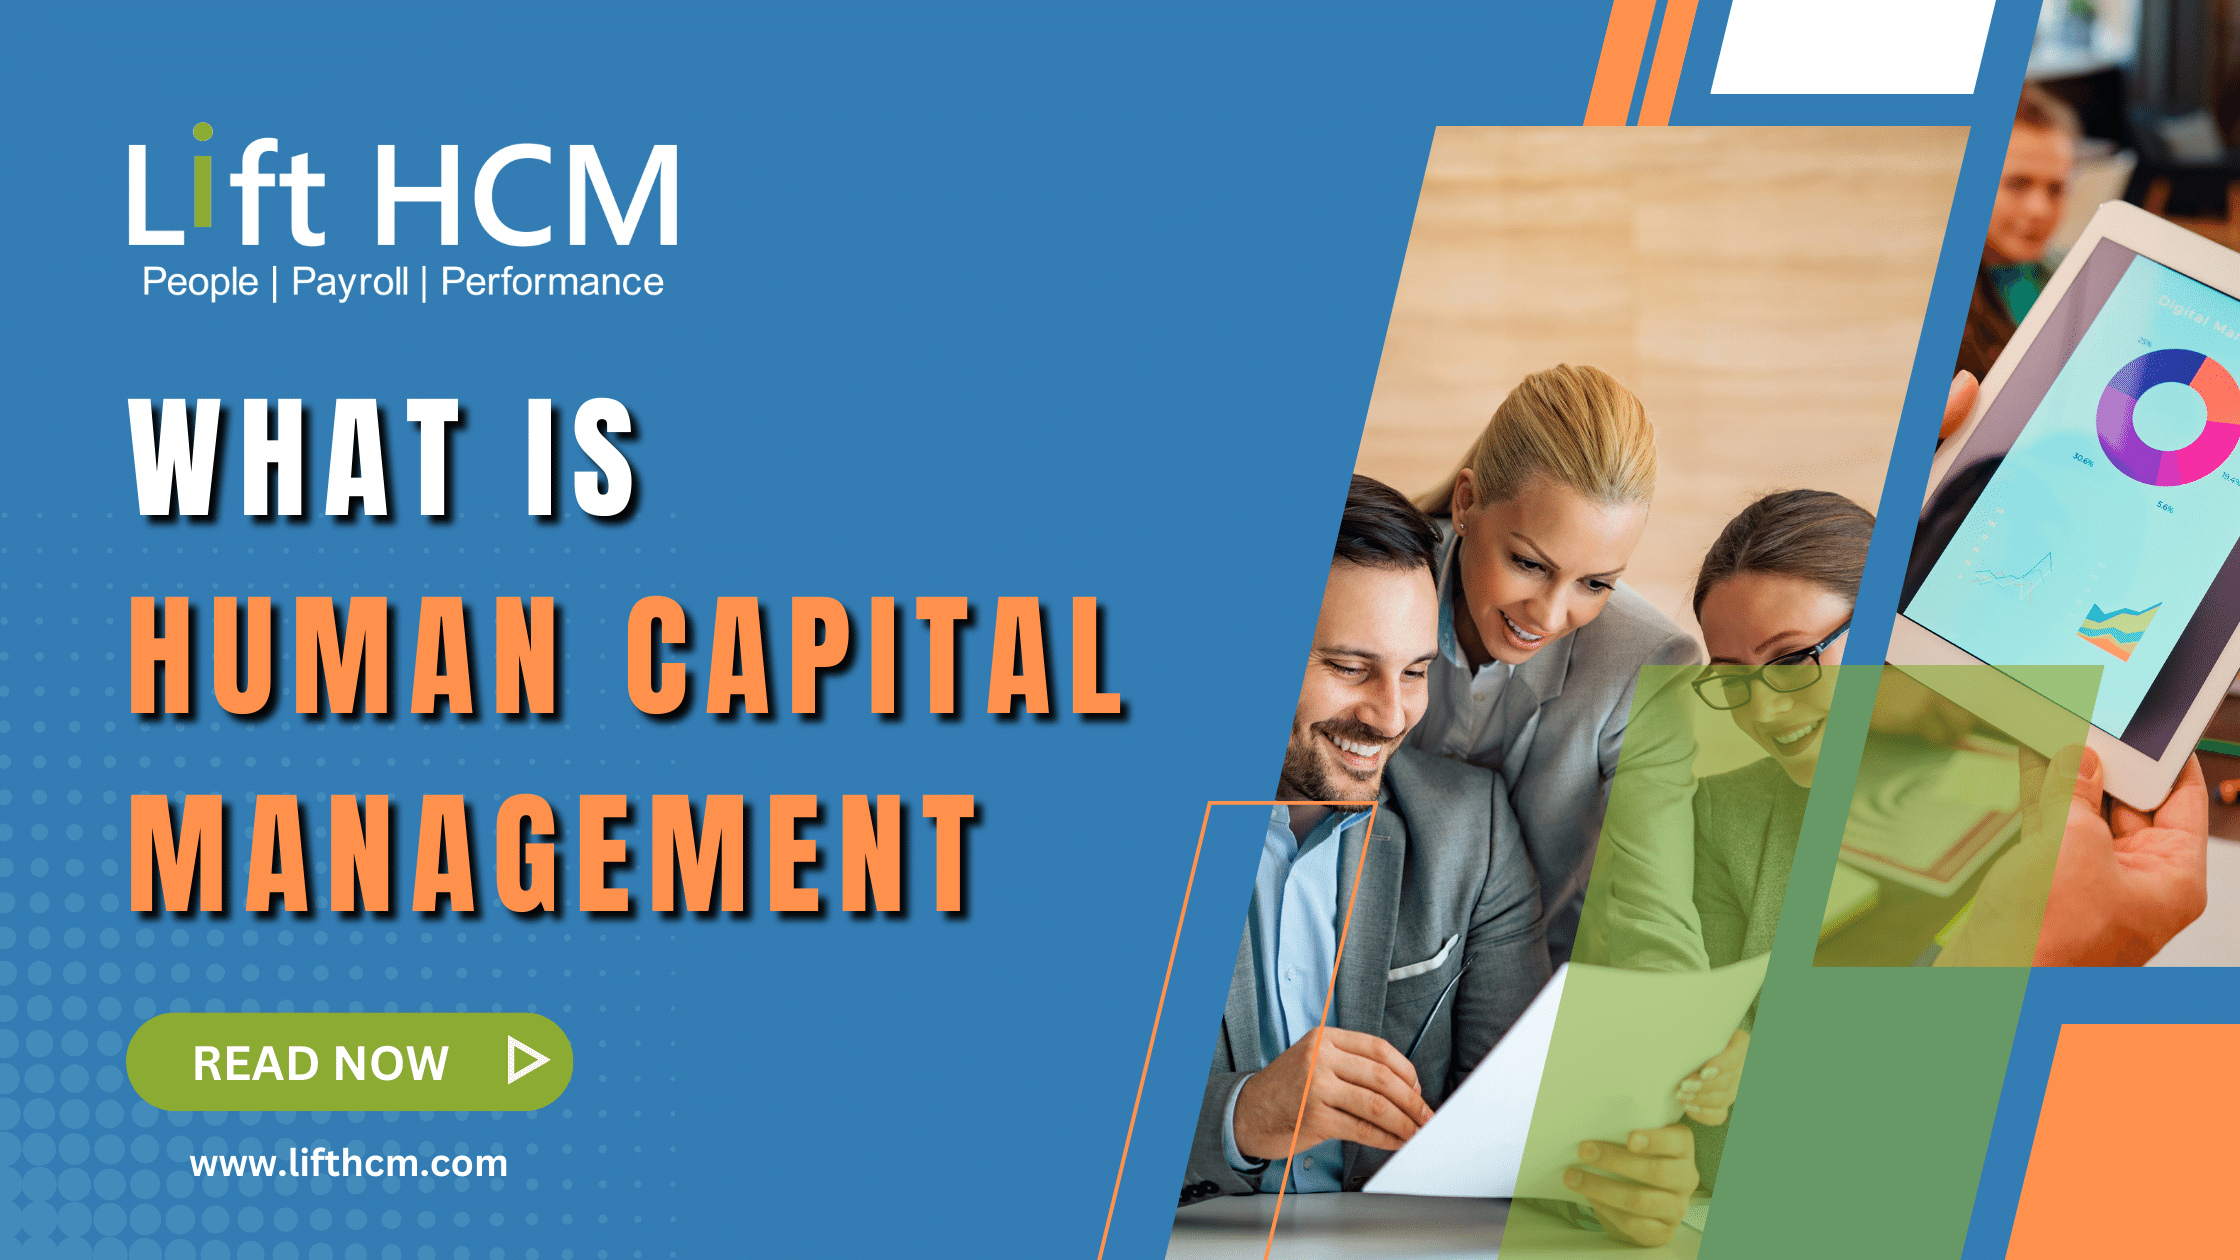 What is human capital management and what can a HCM service provider do for your business?